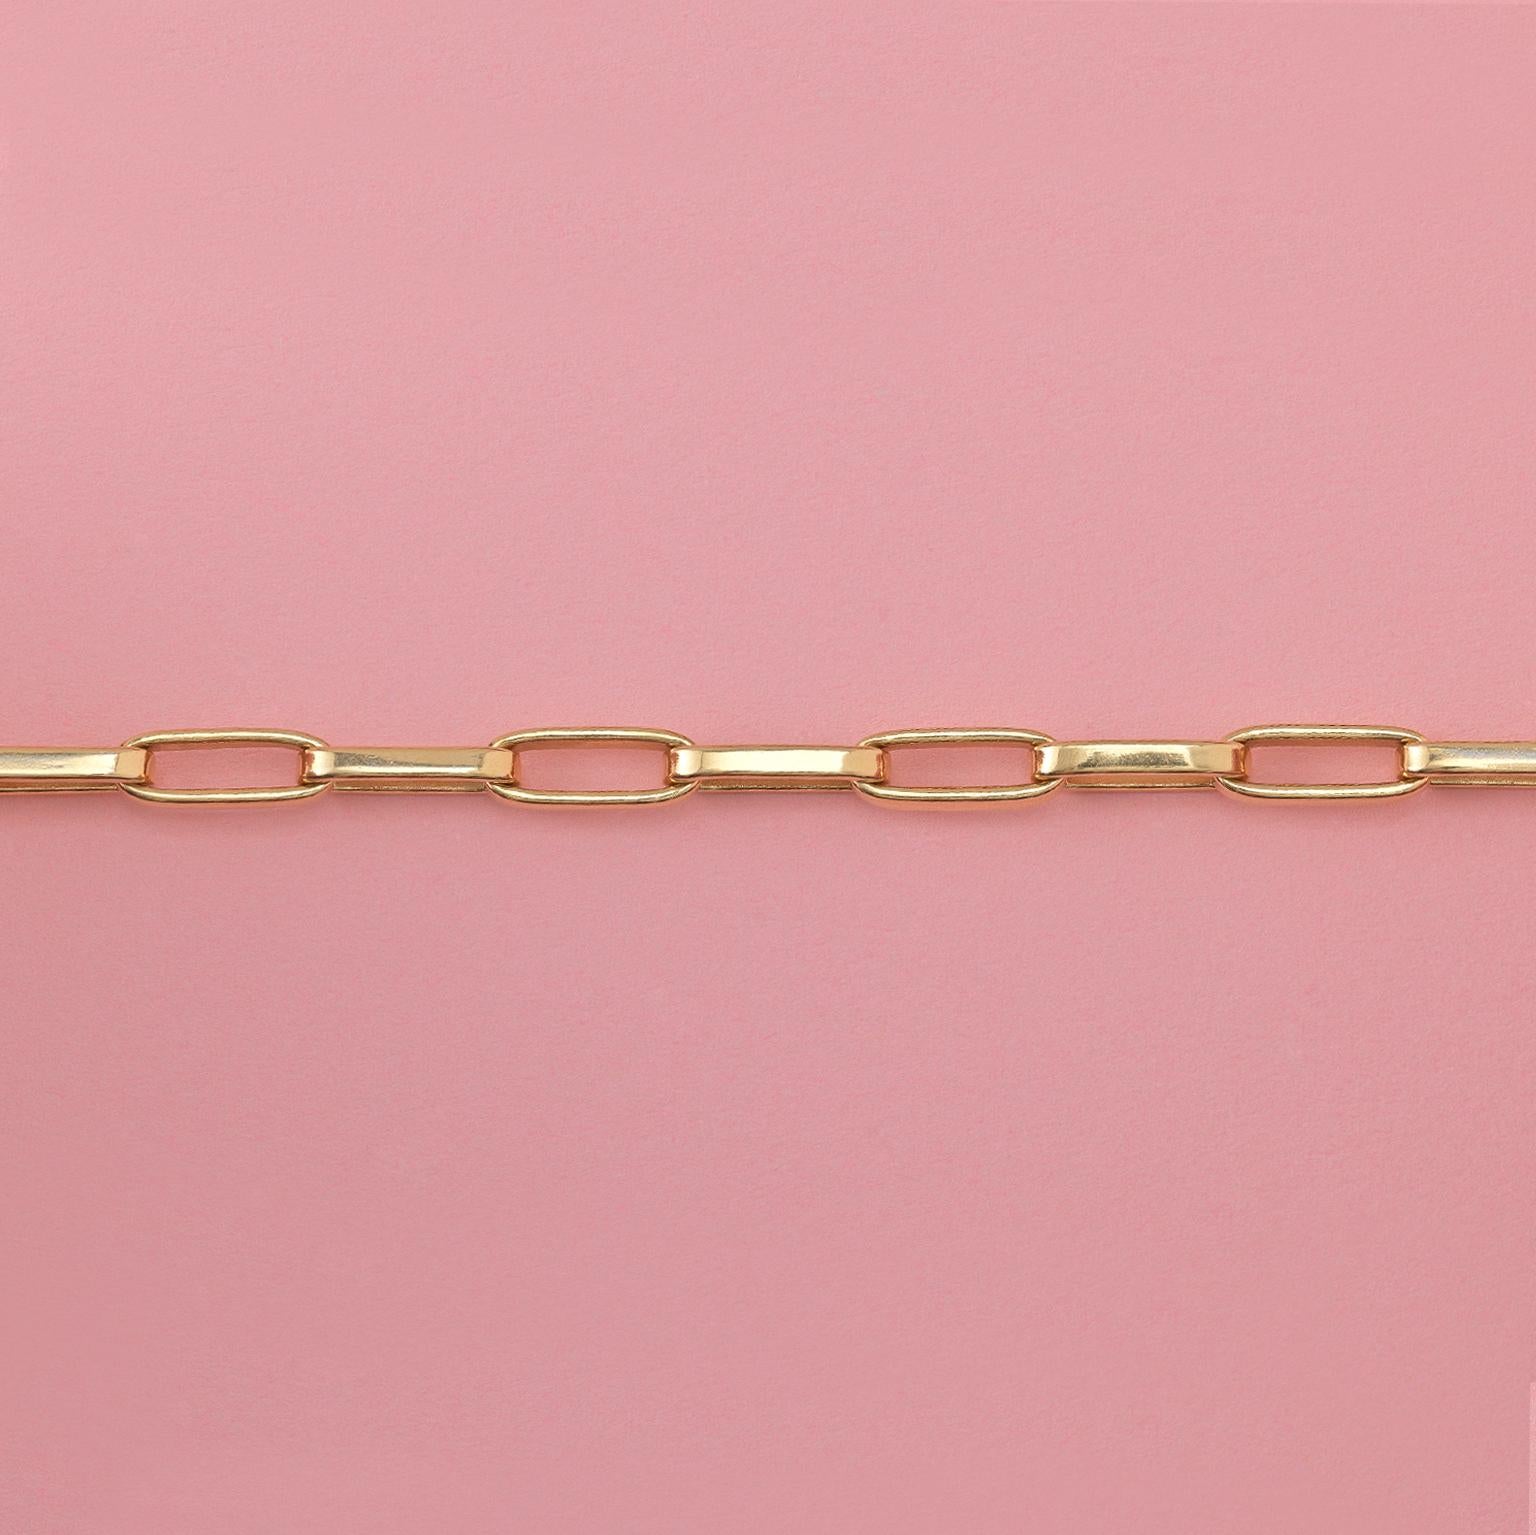 An 18 carat gold vintage bracelet with flat oval links, France.

weight: 22.63 grams
length: 17.7 cm (for a small wrist 15-16 cm)
width: 2.5 – 6 mm.